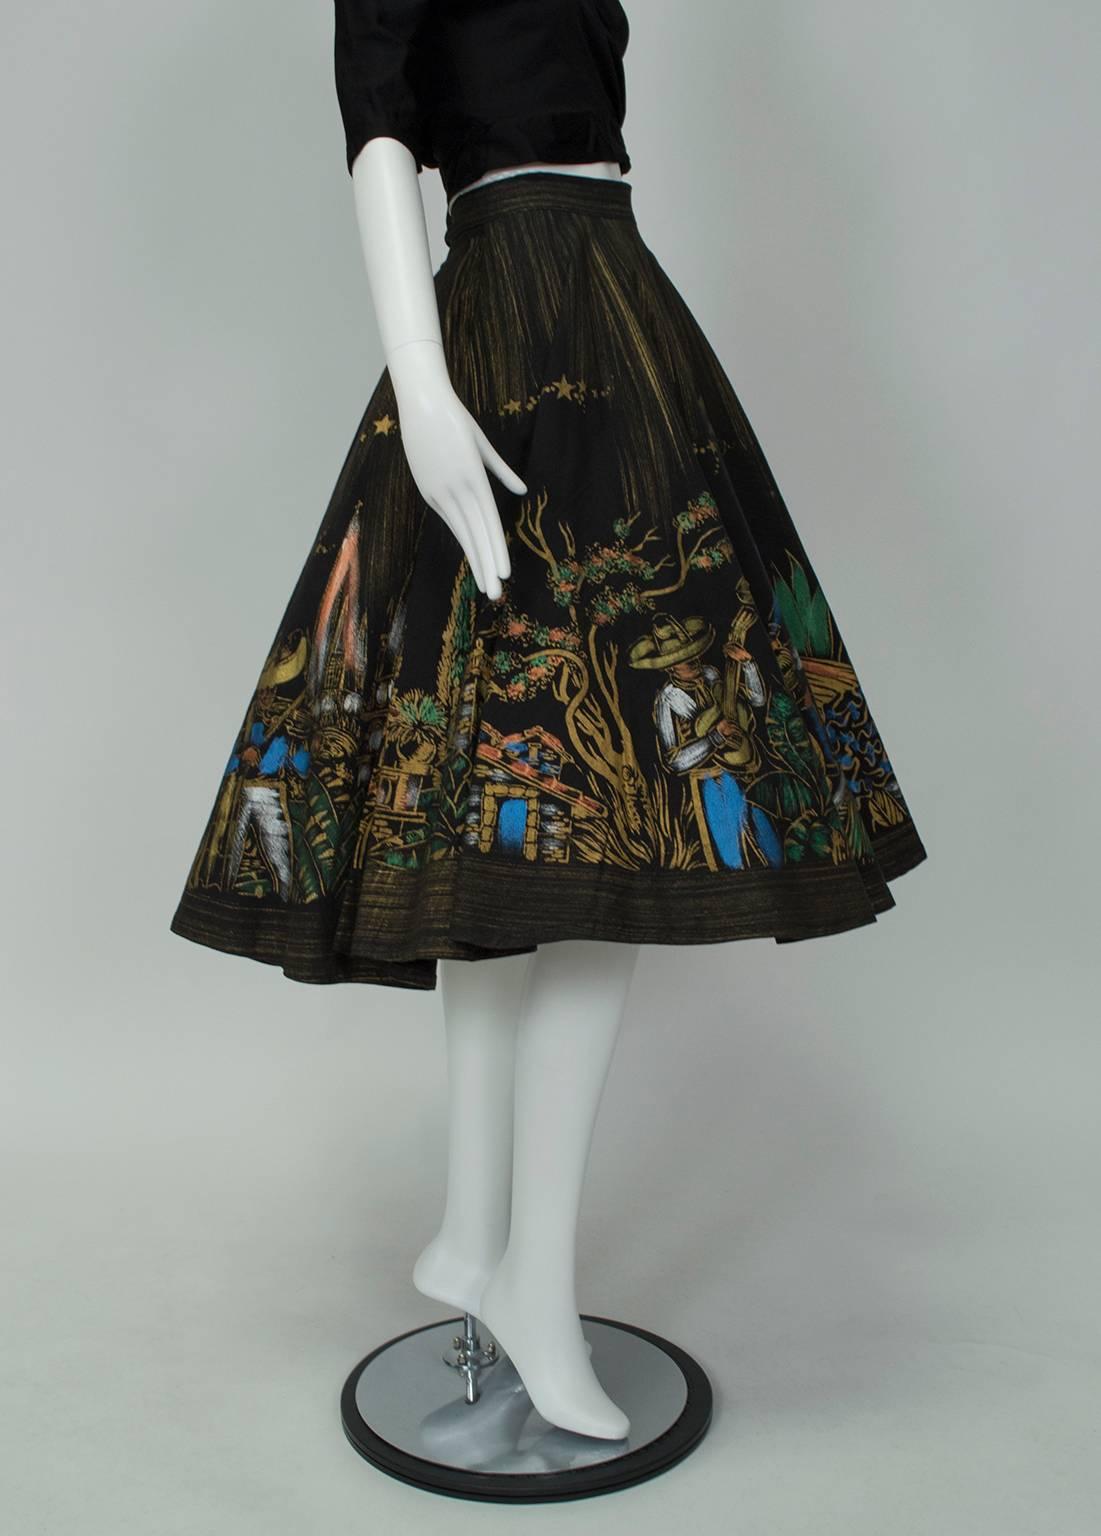 Don't let the basic black color and schoolgirl silhouette fool you: this skirt is anything but ordinary. Fully hand painted in shades of gold, terra cotta, green and azure blue, it features a full mariachi scene complete with a dancing couple around